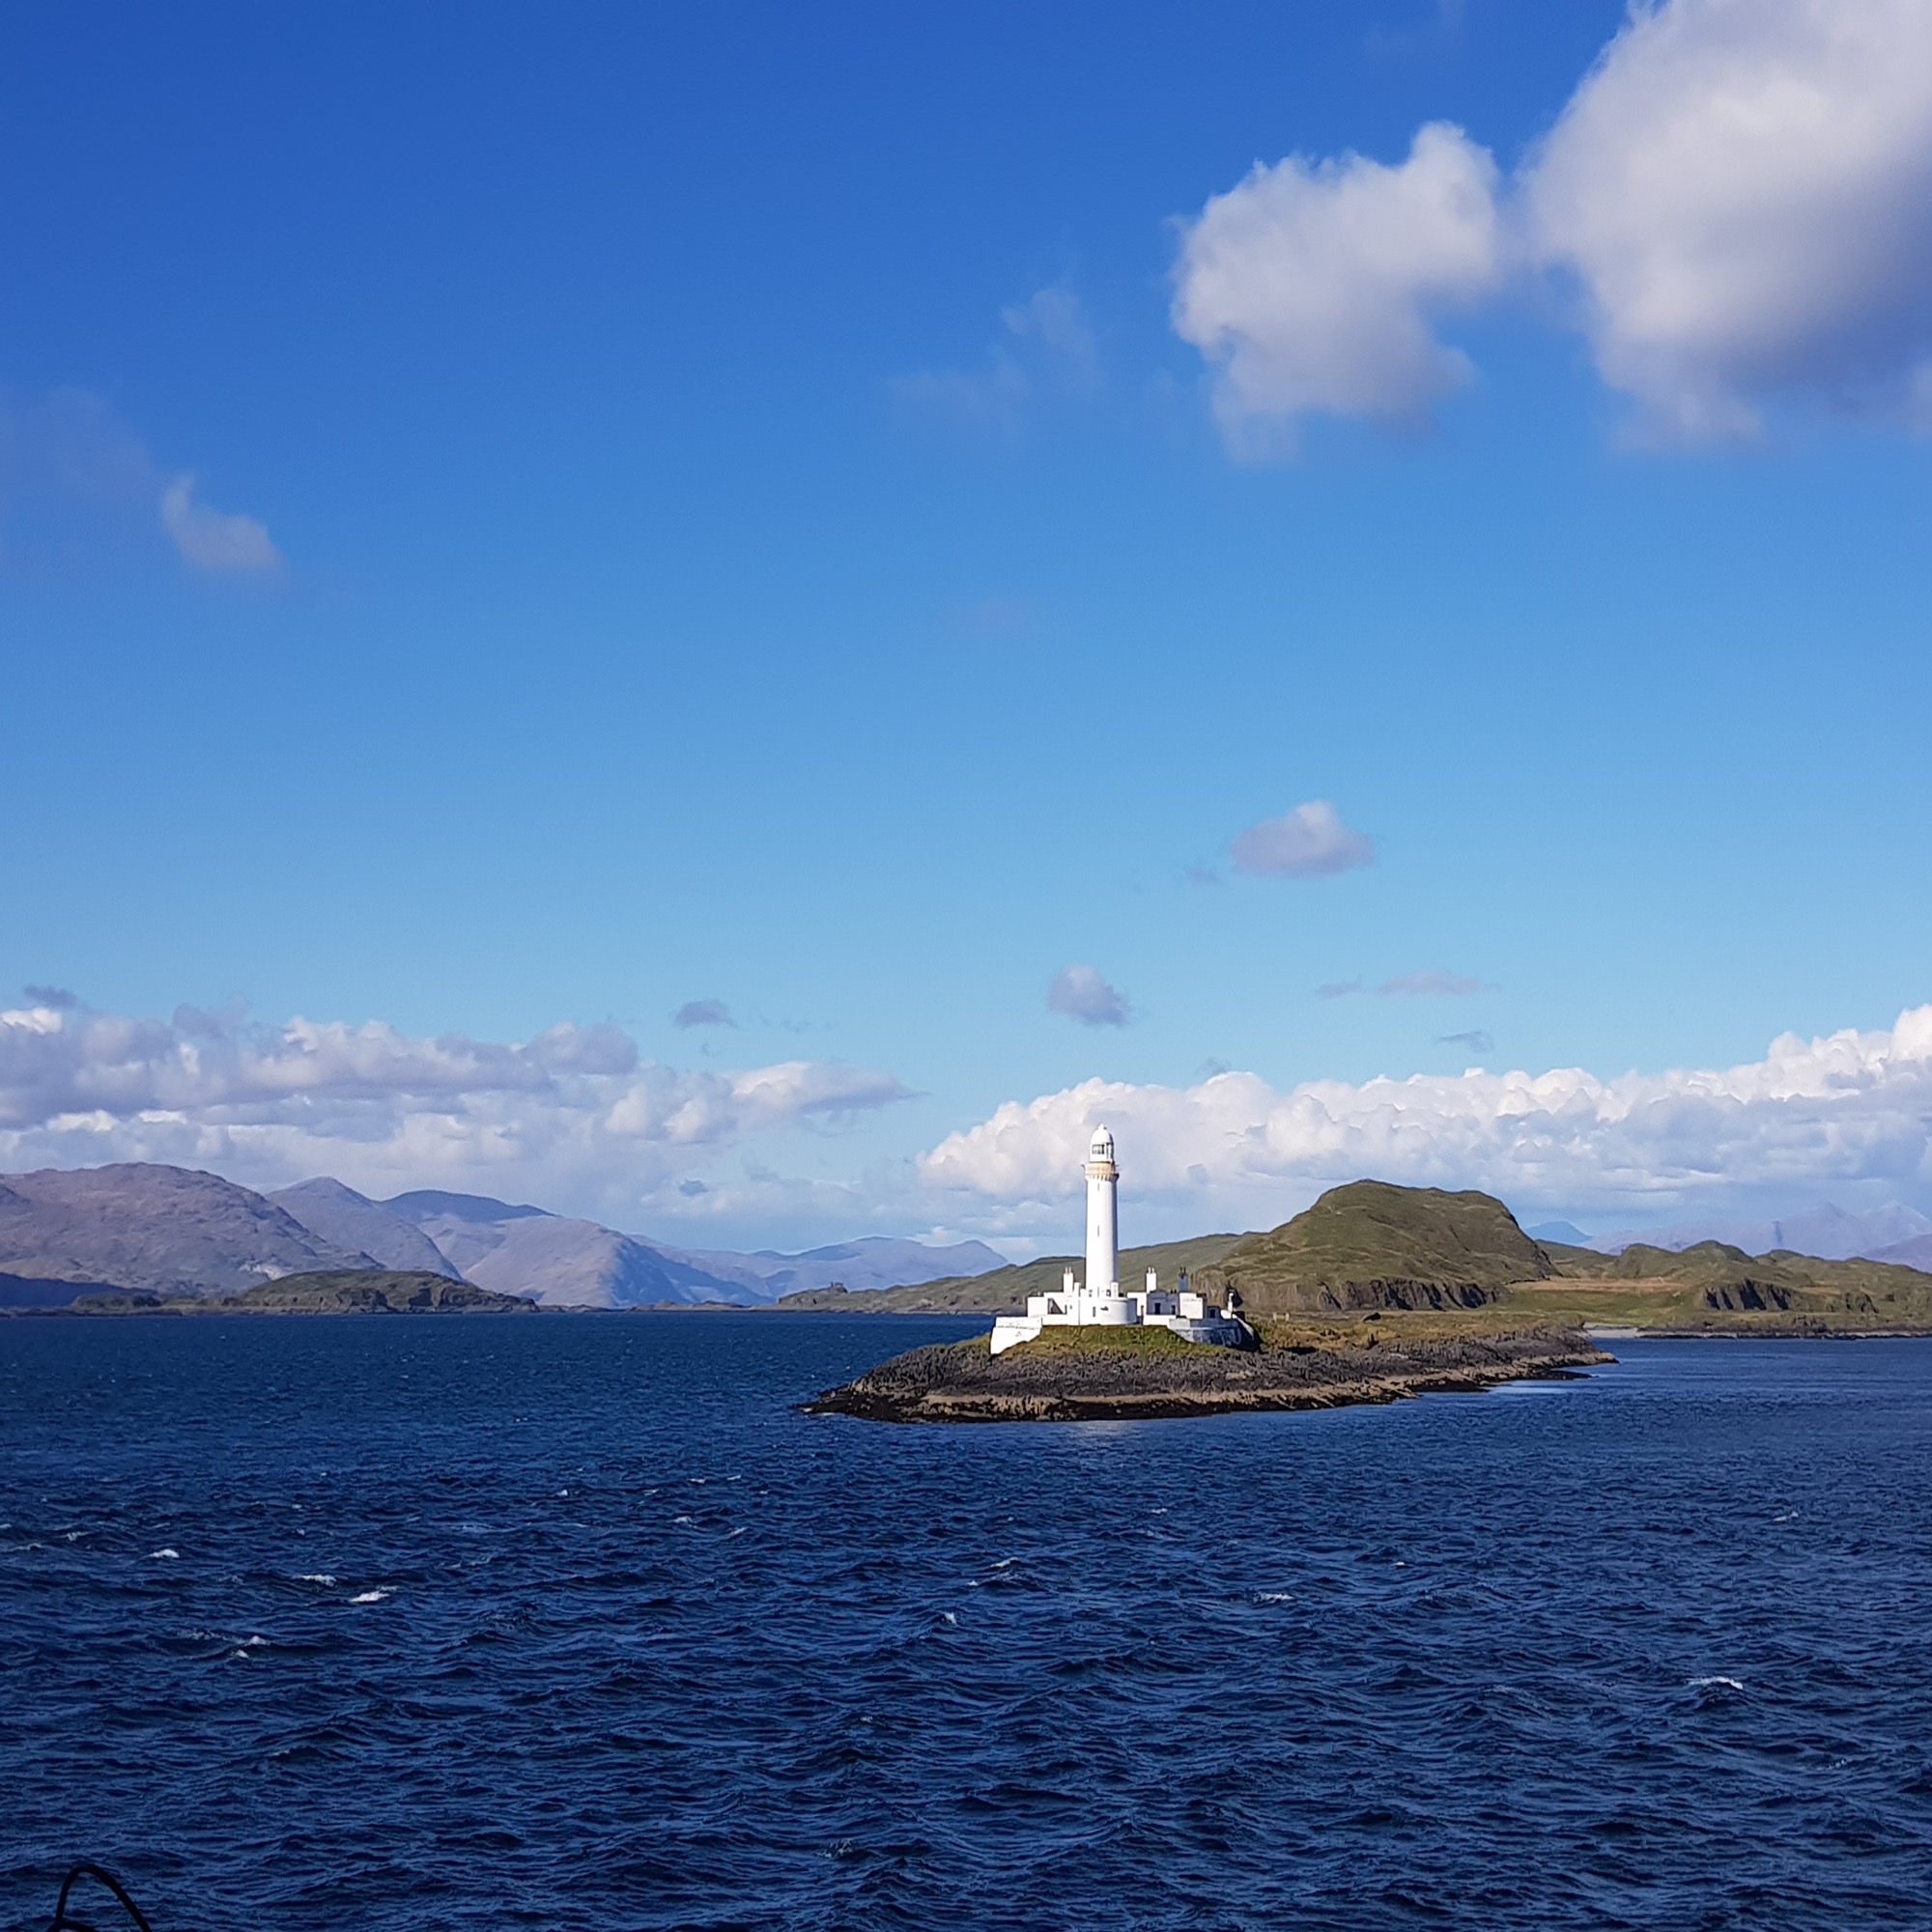 The lighthouse on Eilean Musdile from the ferry crossing to Mull